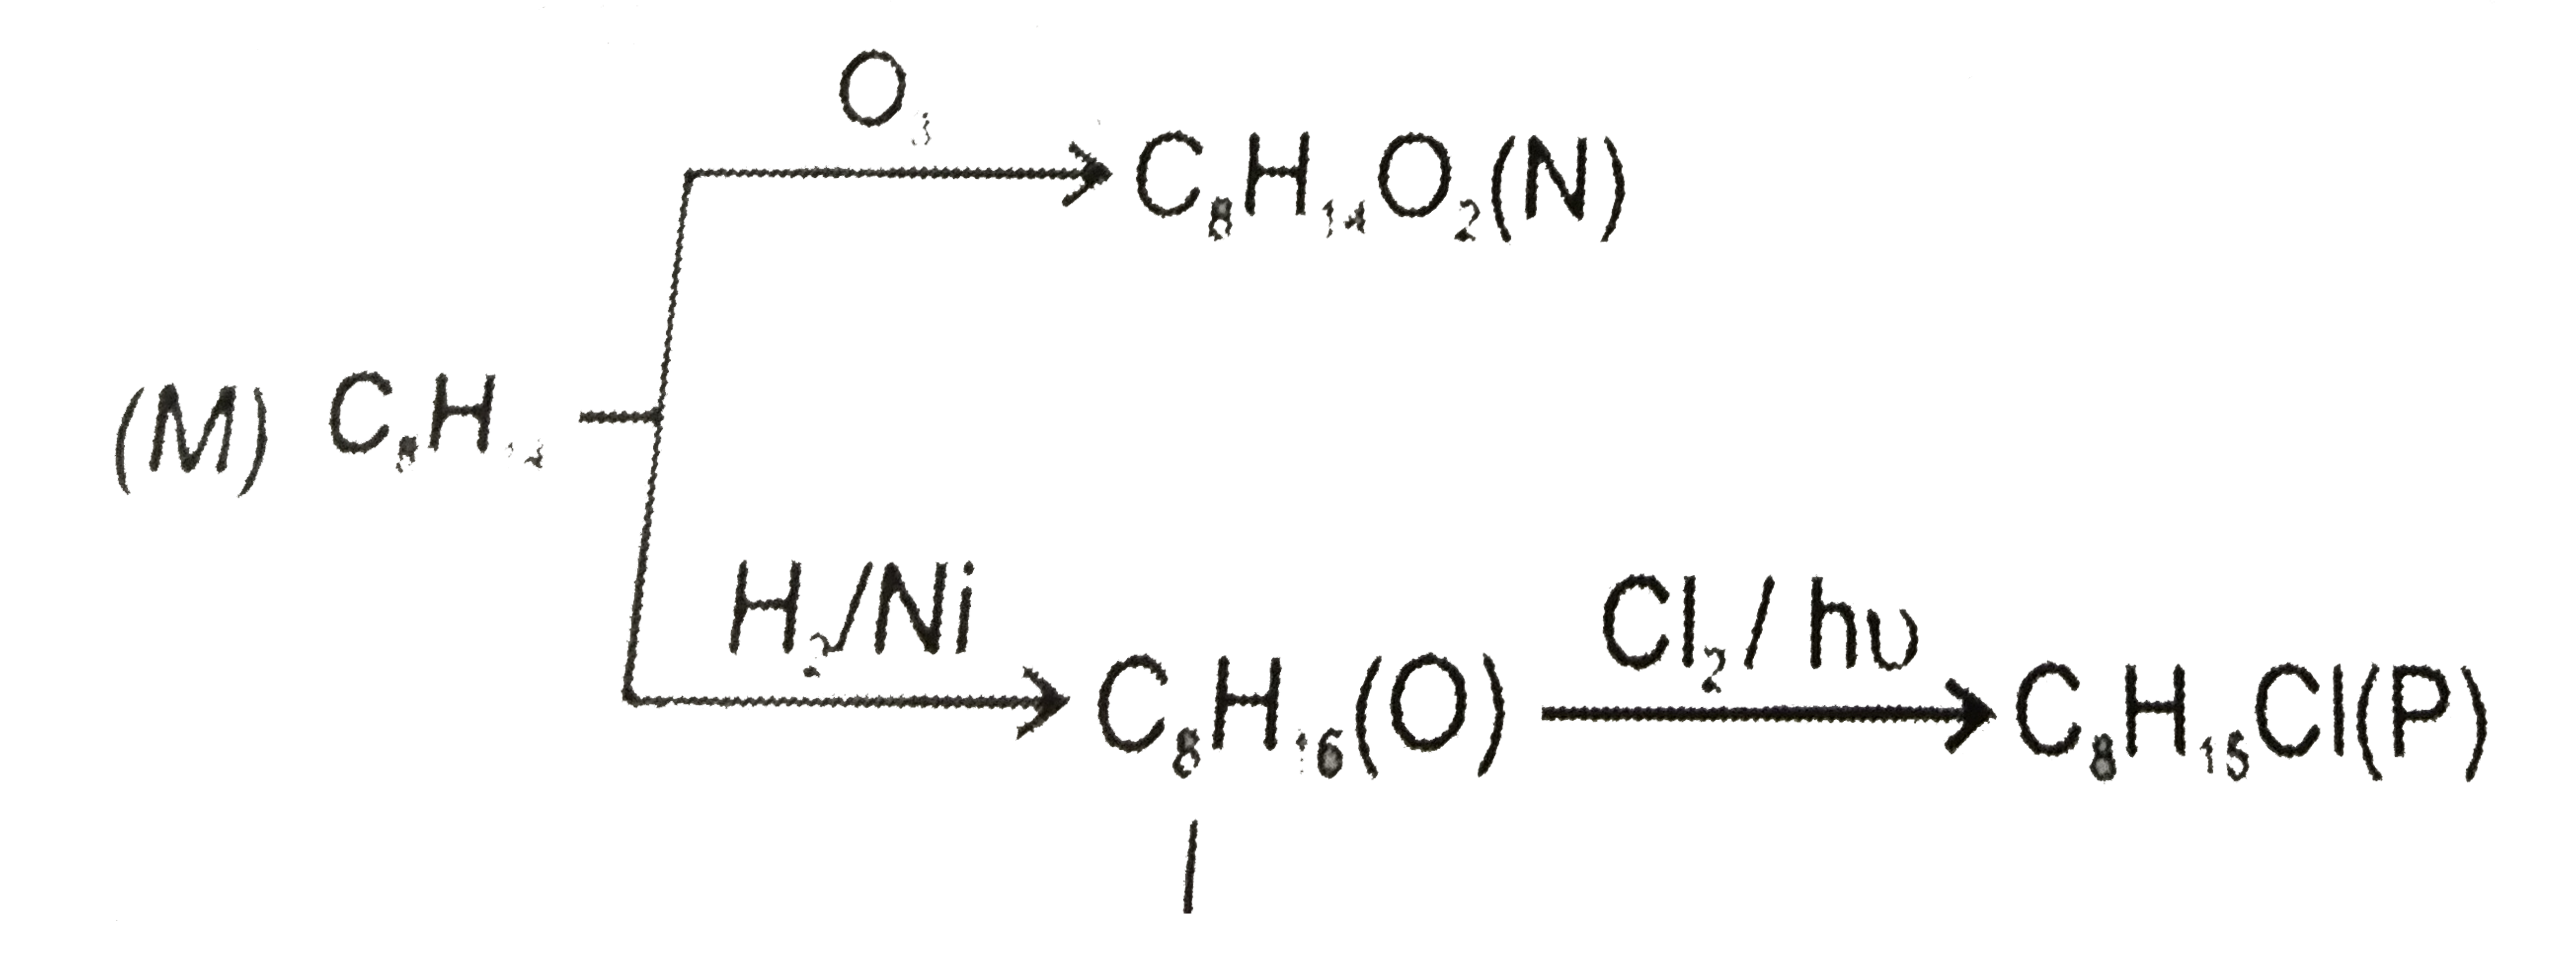 The chemical reaction of an unsaturated compound 'M' are given below. Determine the possible structural formula of 'M'